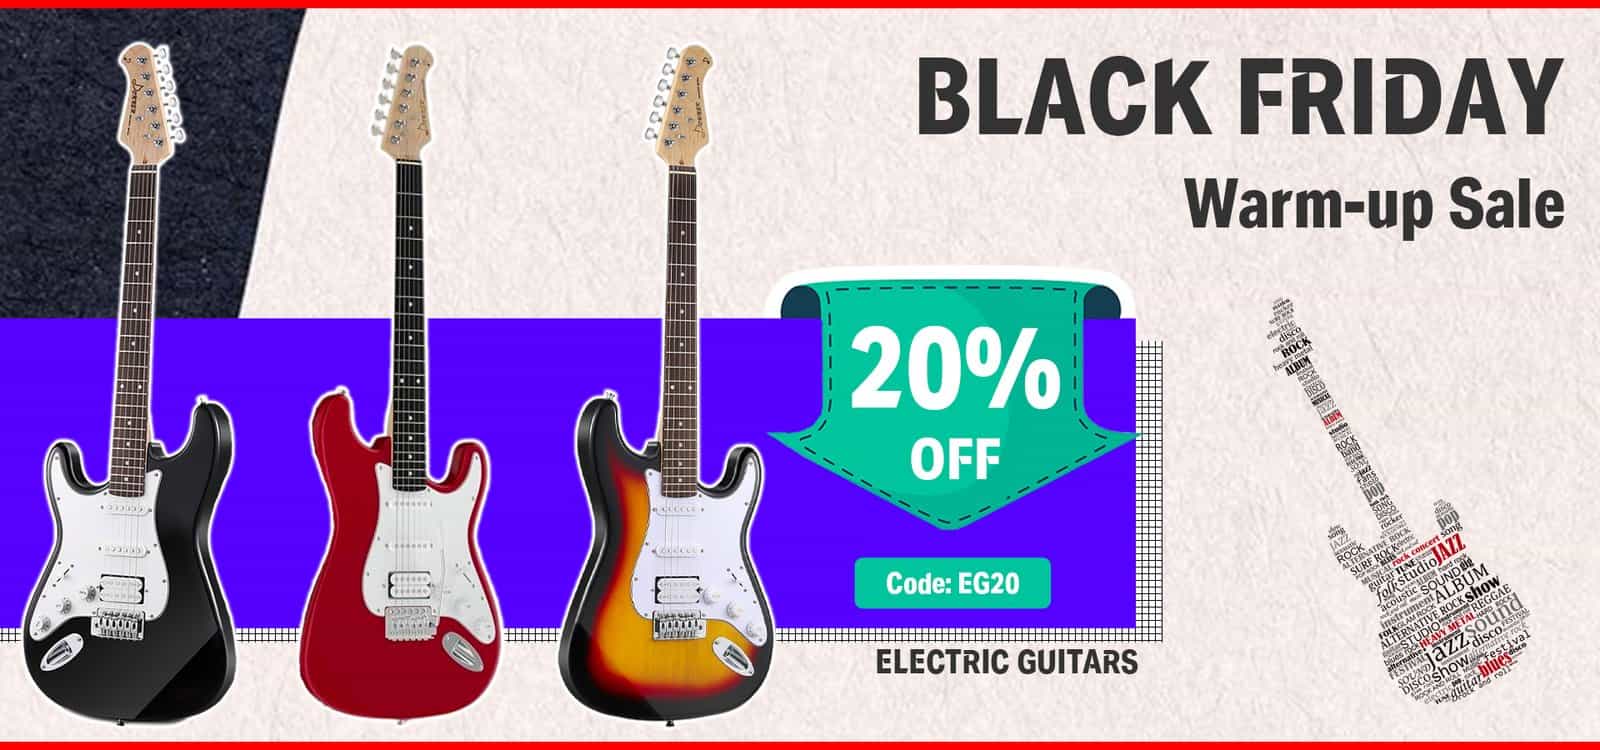 Get extra 20% OFF on electric guitars with promo code including electric, acoustic & more